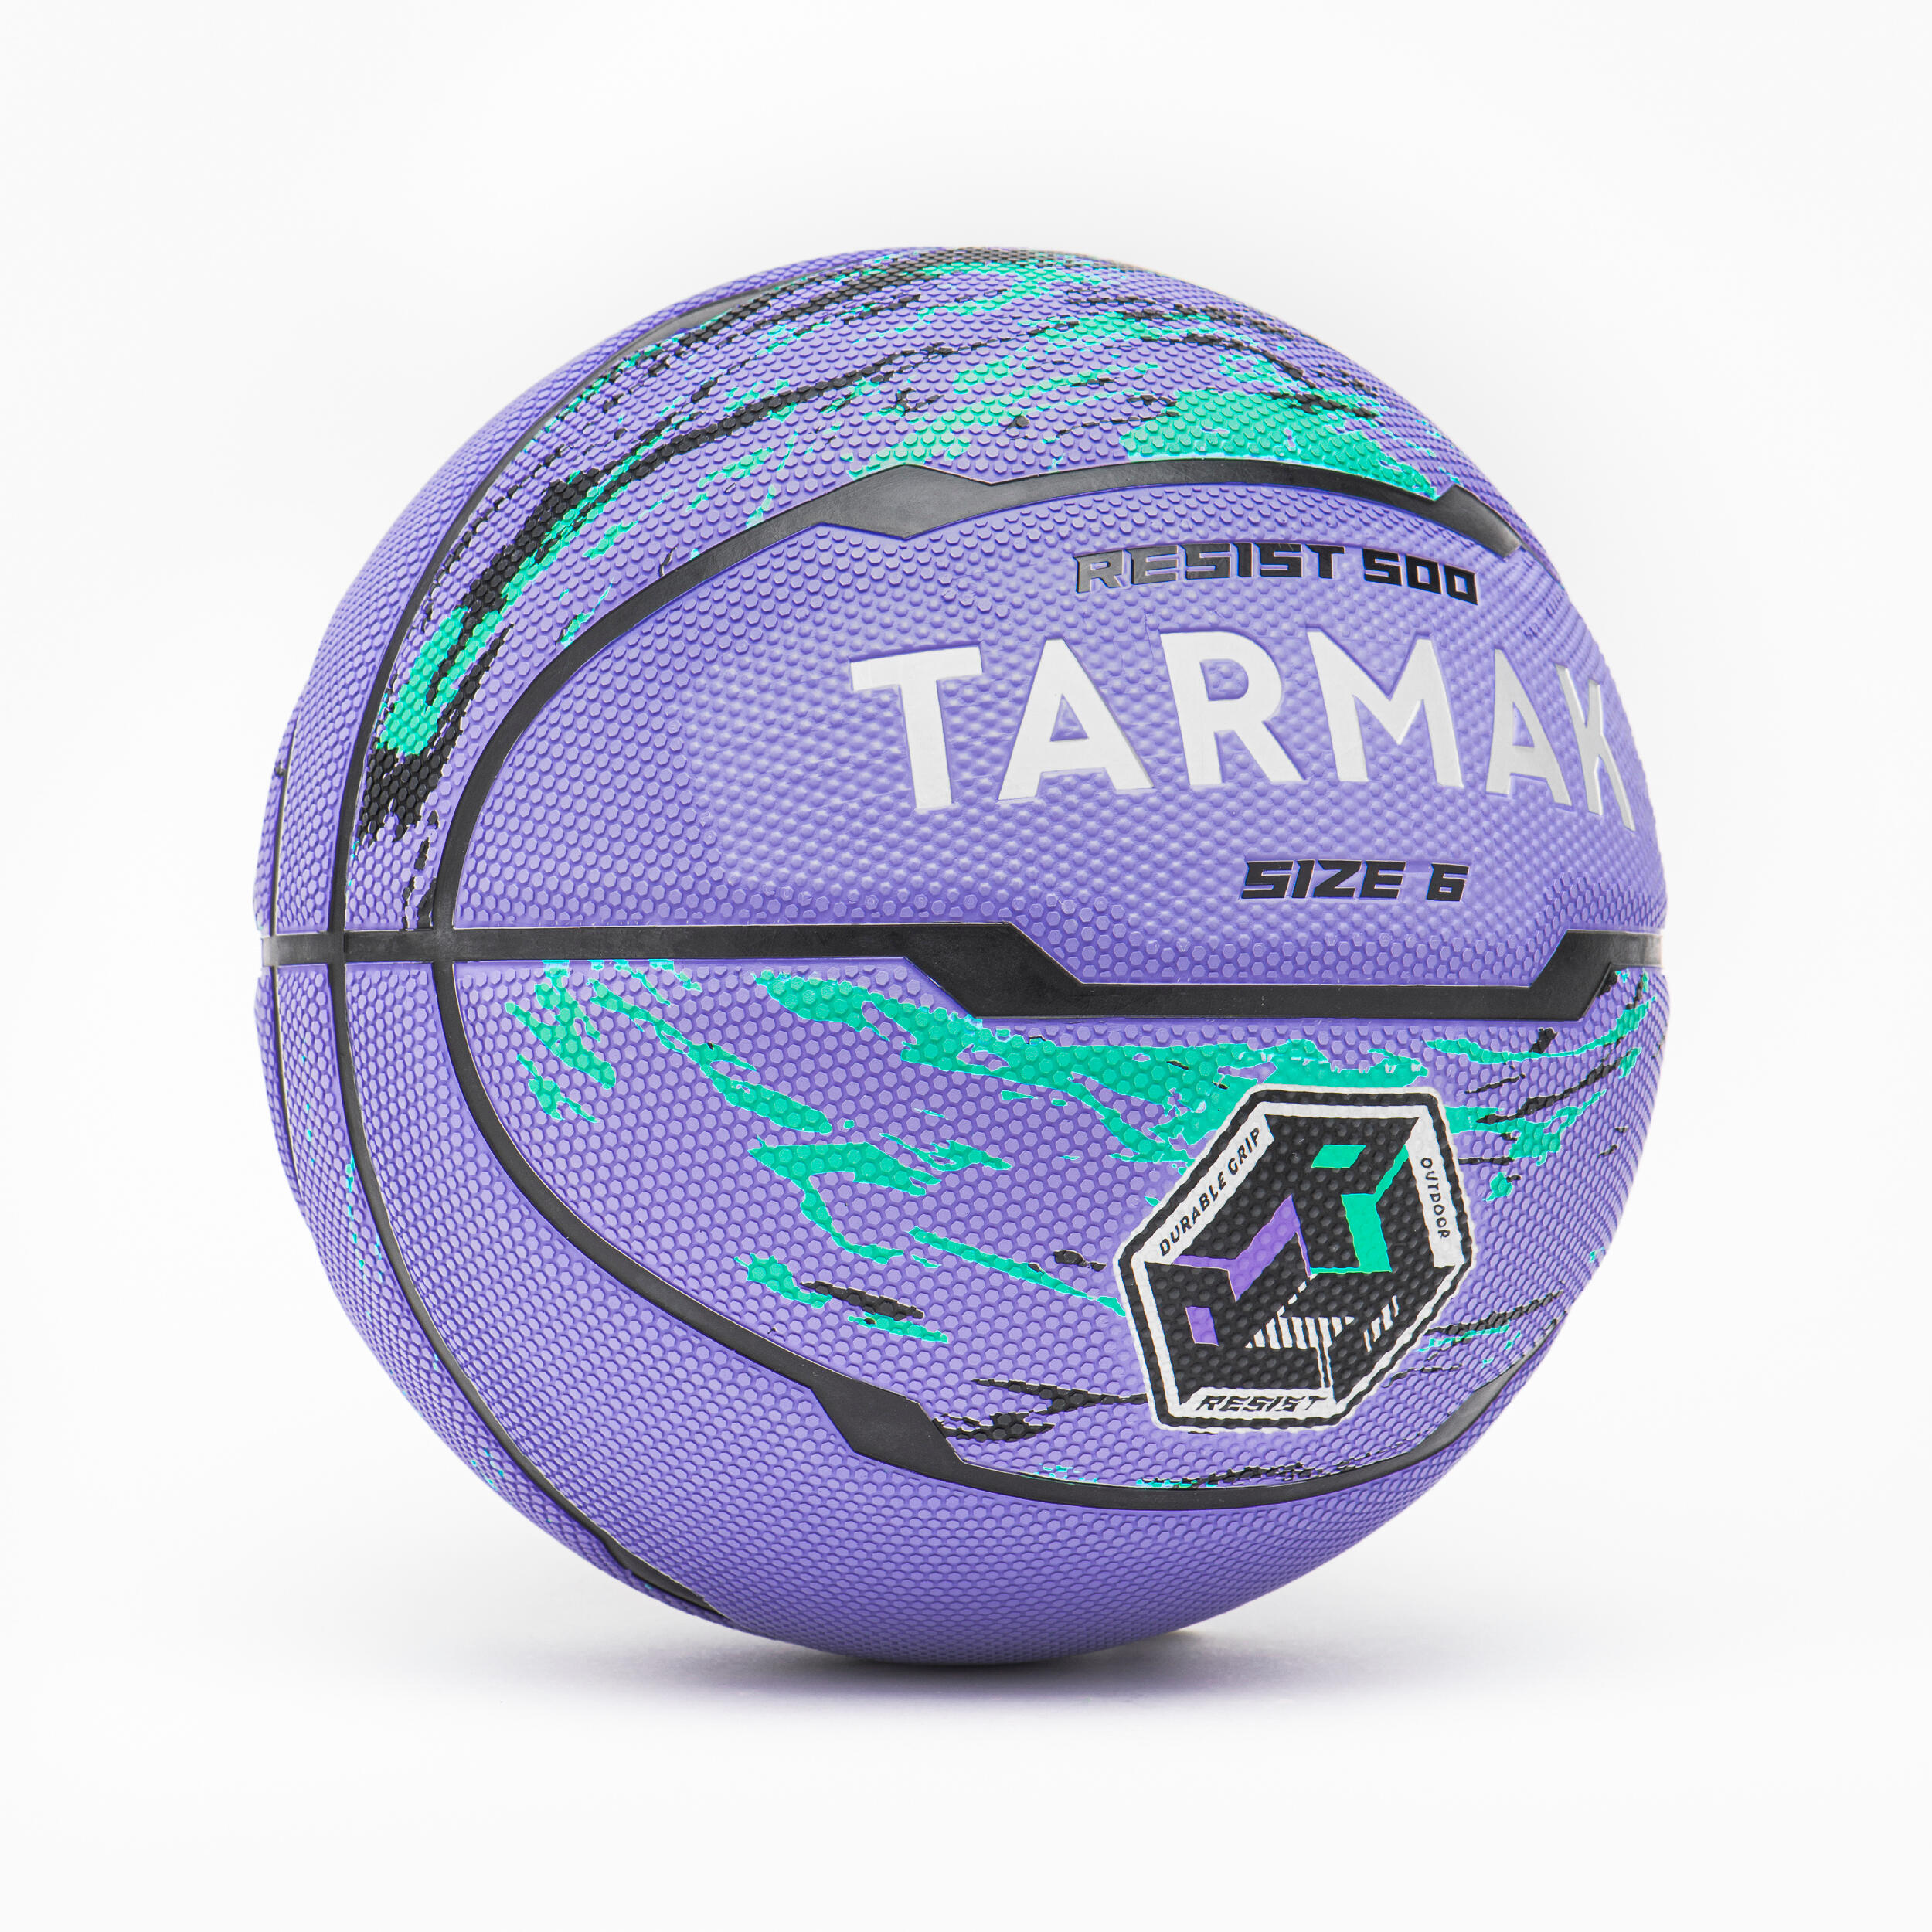 Basketball Size 6 R500 - Purple/Turquoise 2/4